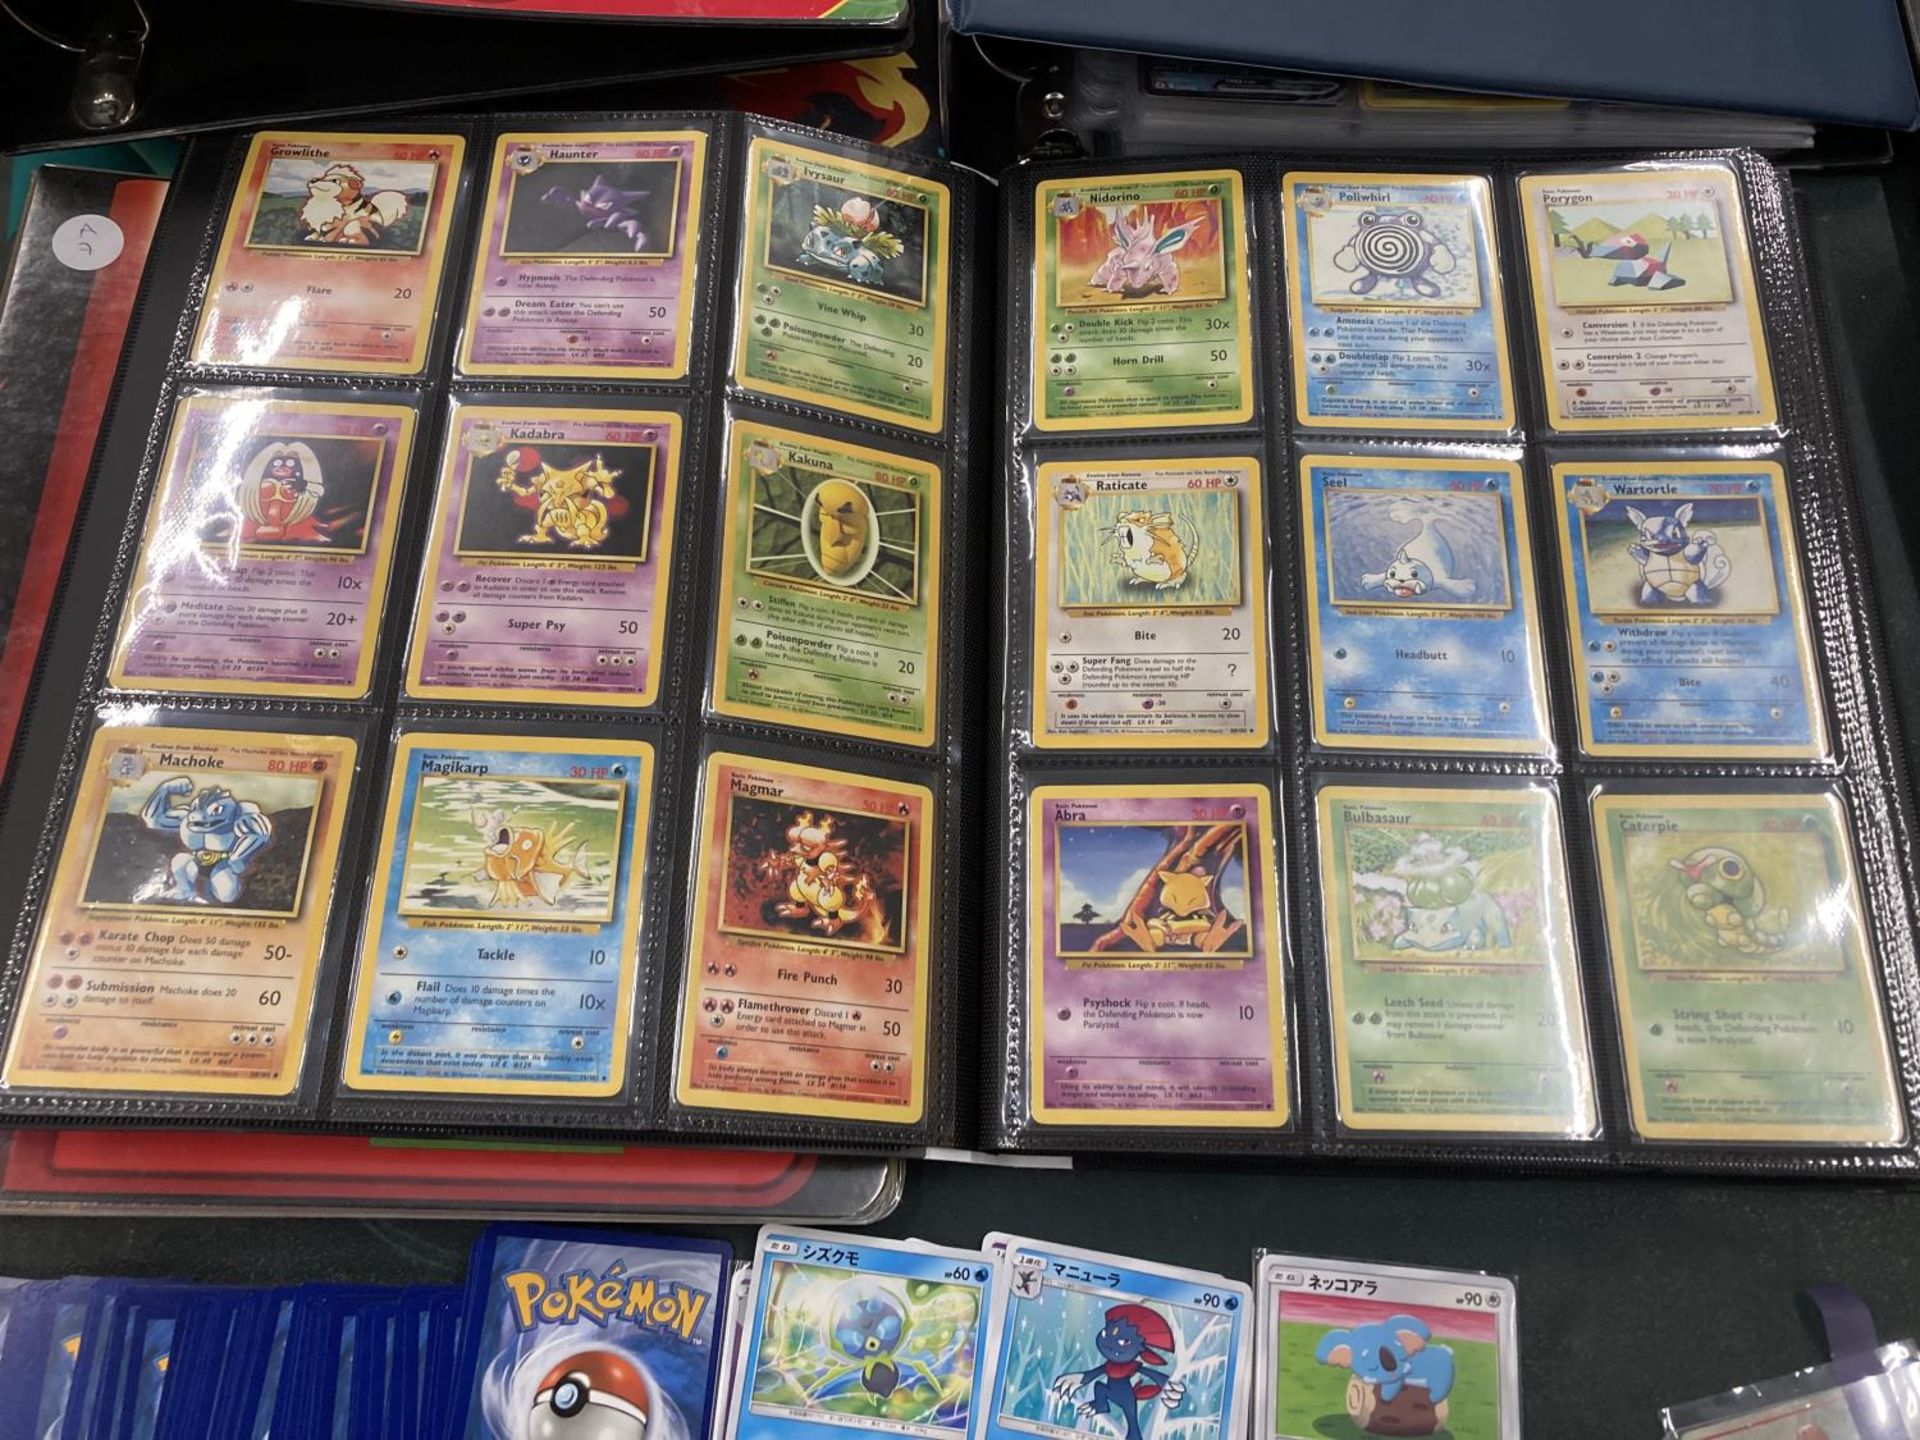 A FOLDER OF POKEMON CARDS TO INCLUDE 1999 BASE SET, TOPPS SERIES 1 INCLUDING CHARIZARD AND HOLOS - Image 4 of 6